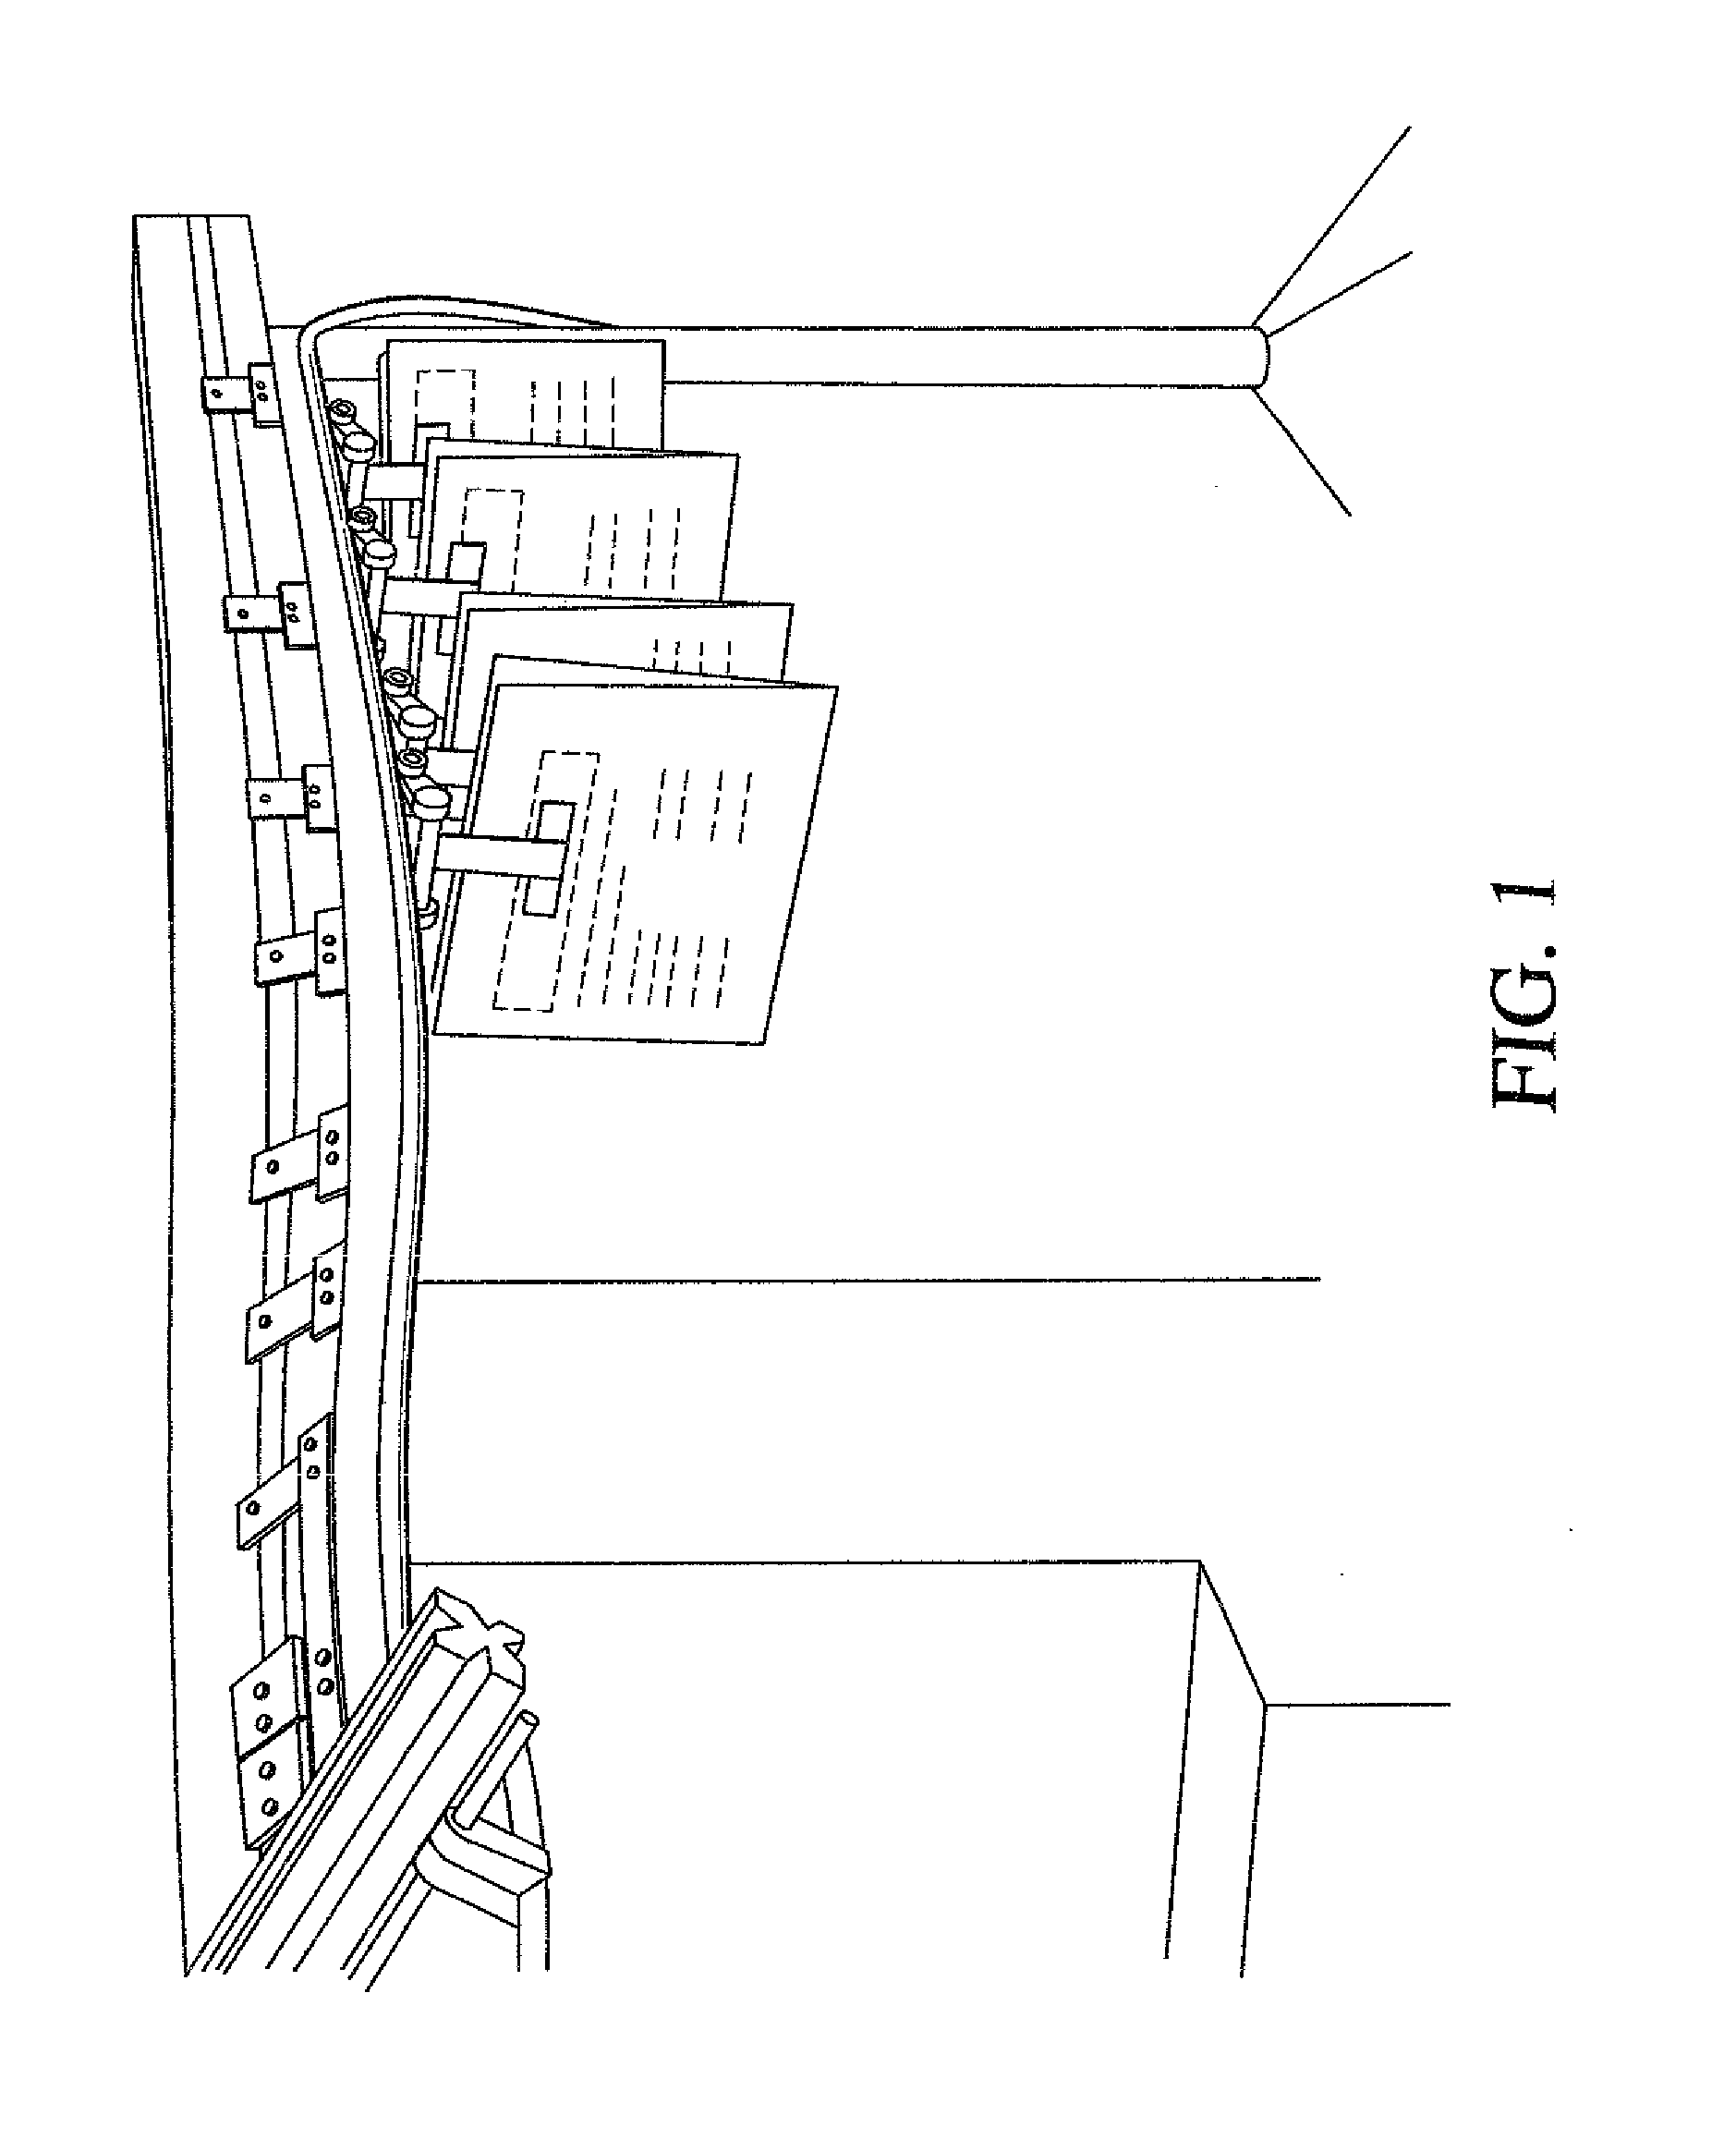 Apparatus and Method for Orienting Products for Applying Indicia During Transport